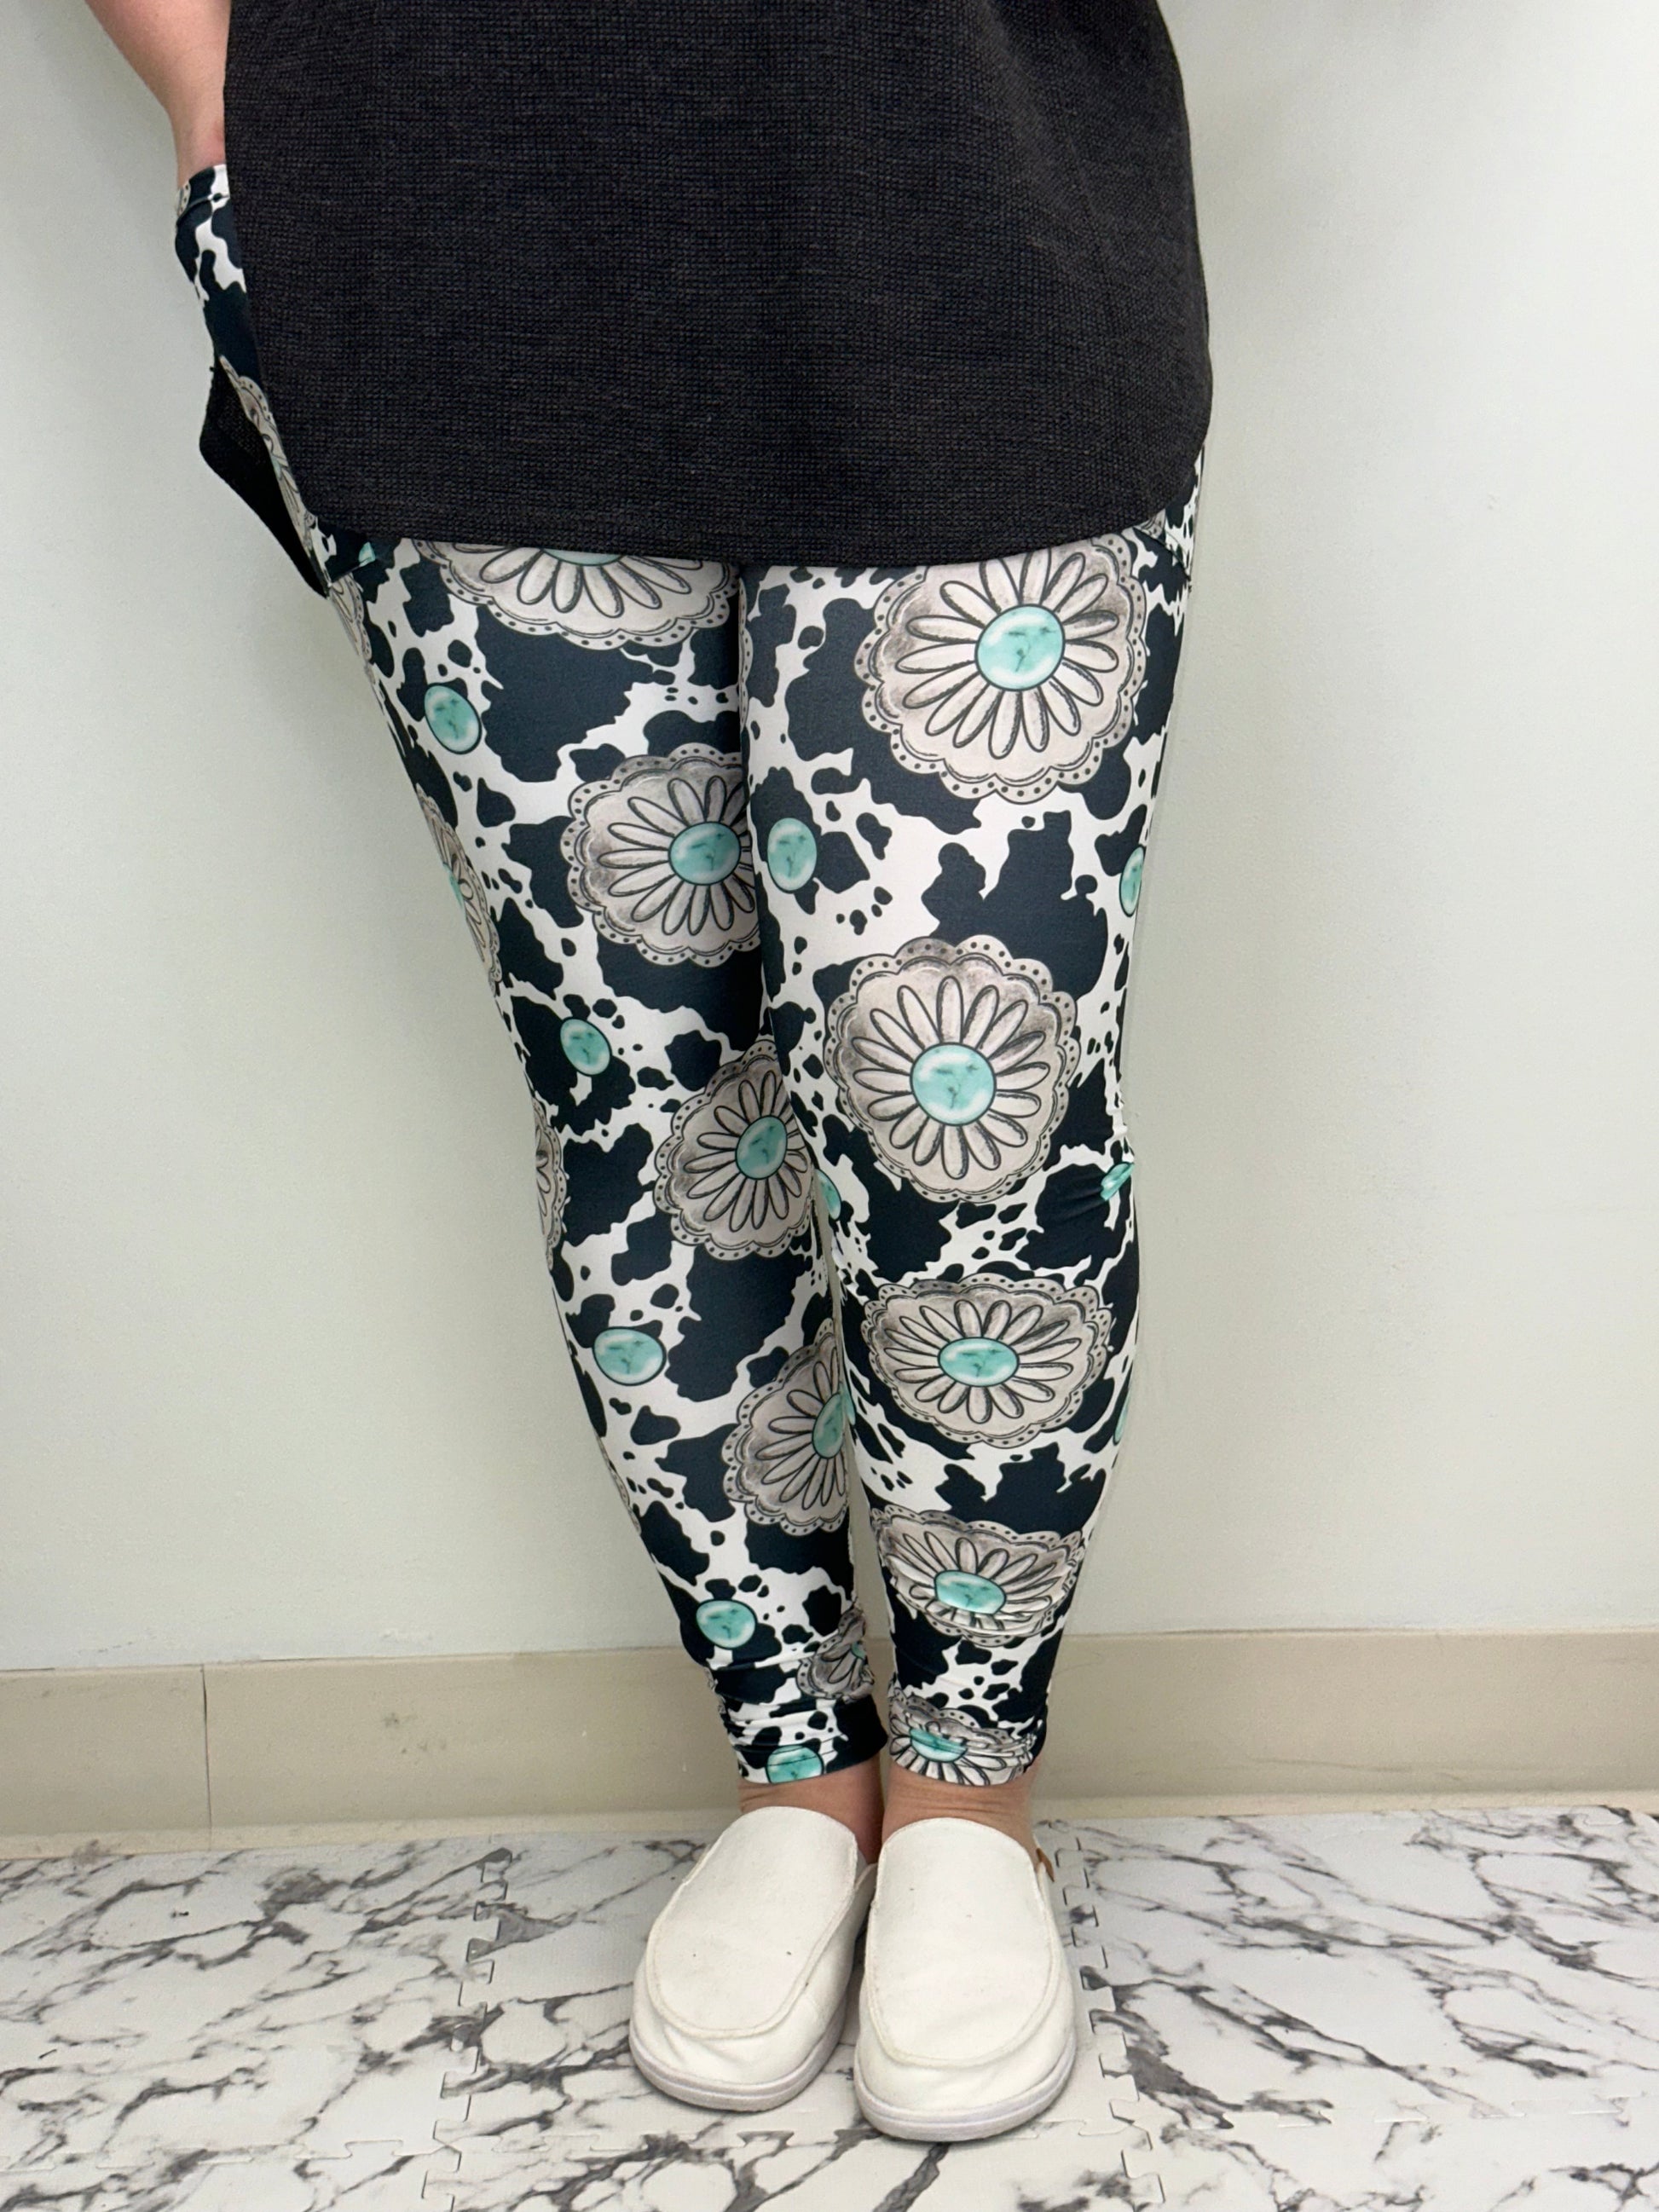 Turquoise Cow Leggings w/ Pockets - Three Bears Boutique